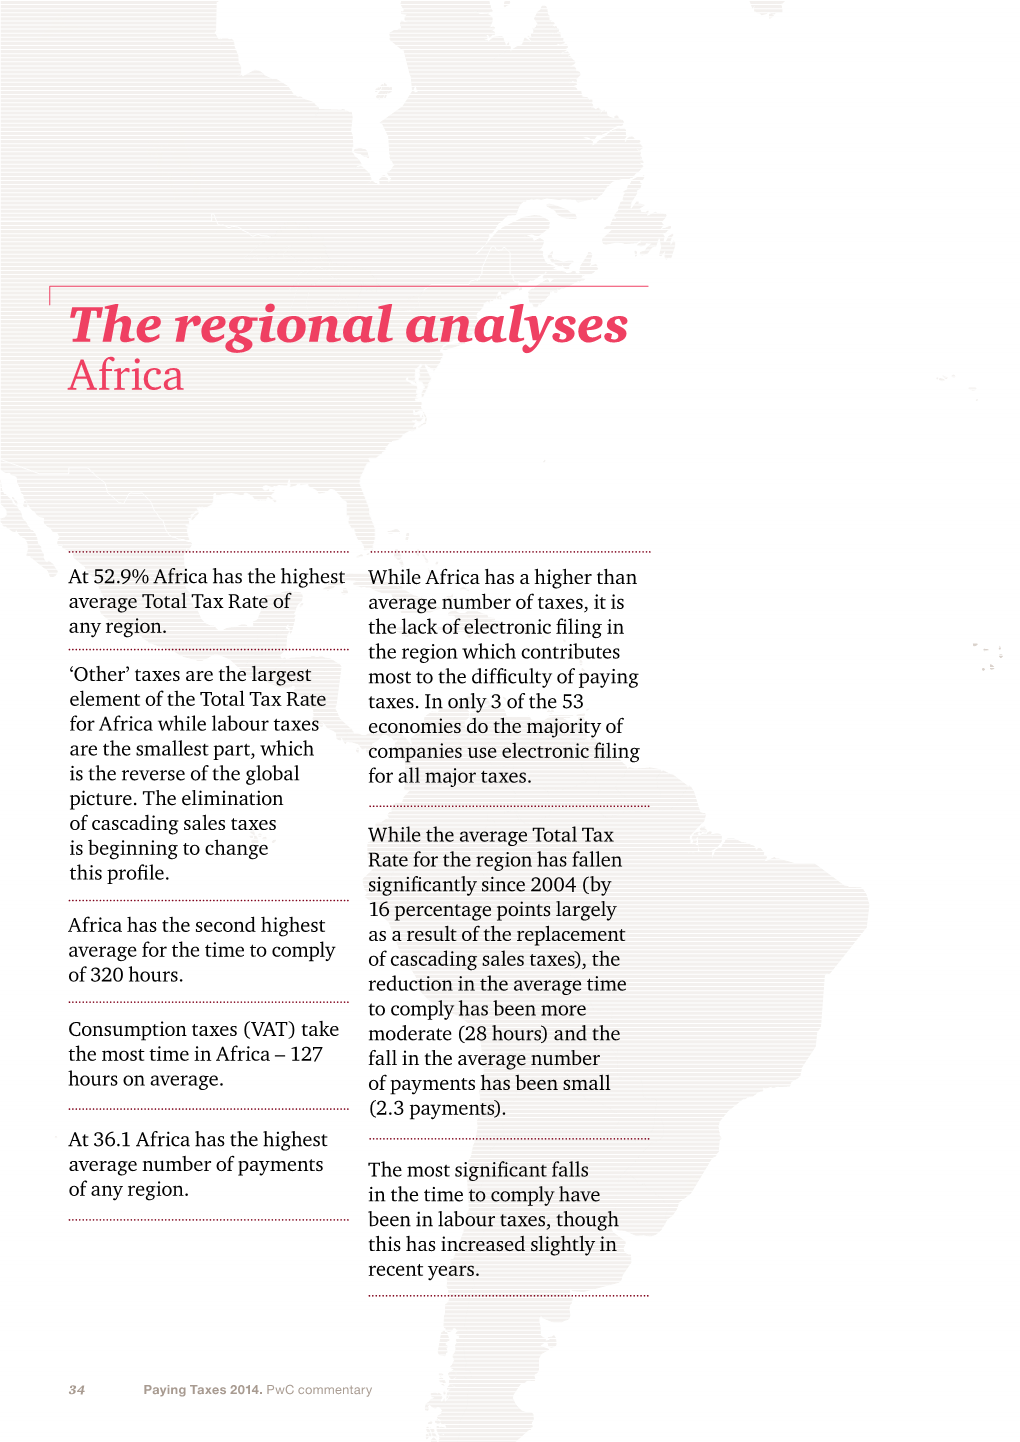 The Regional Analyses Africa